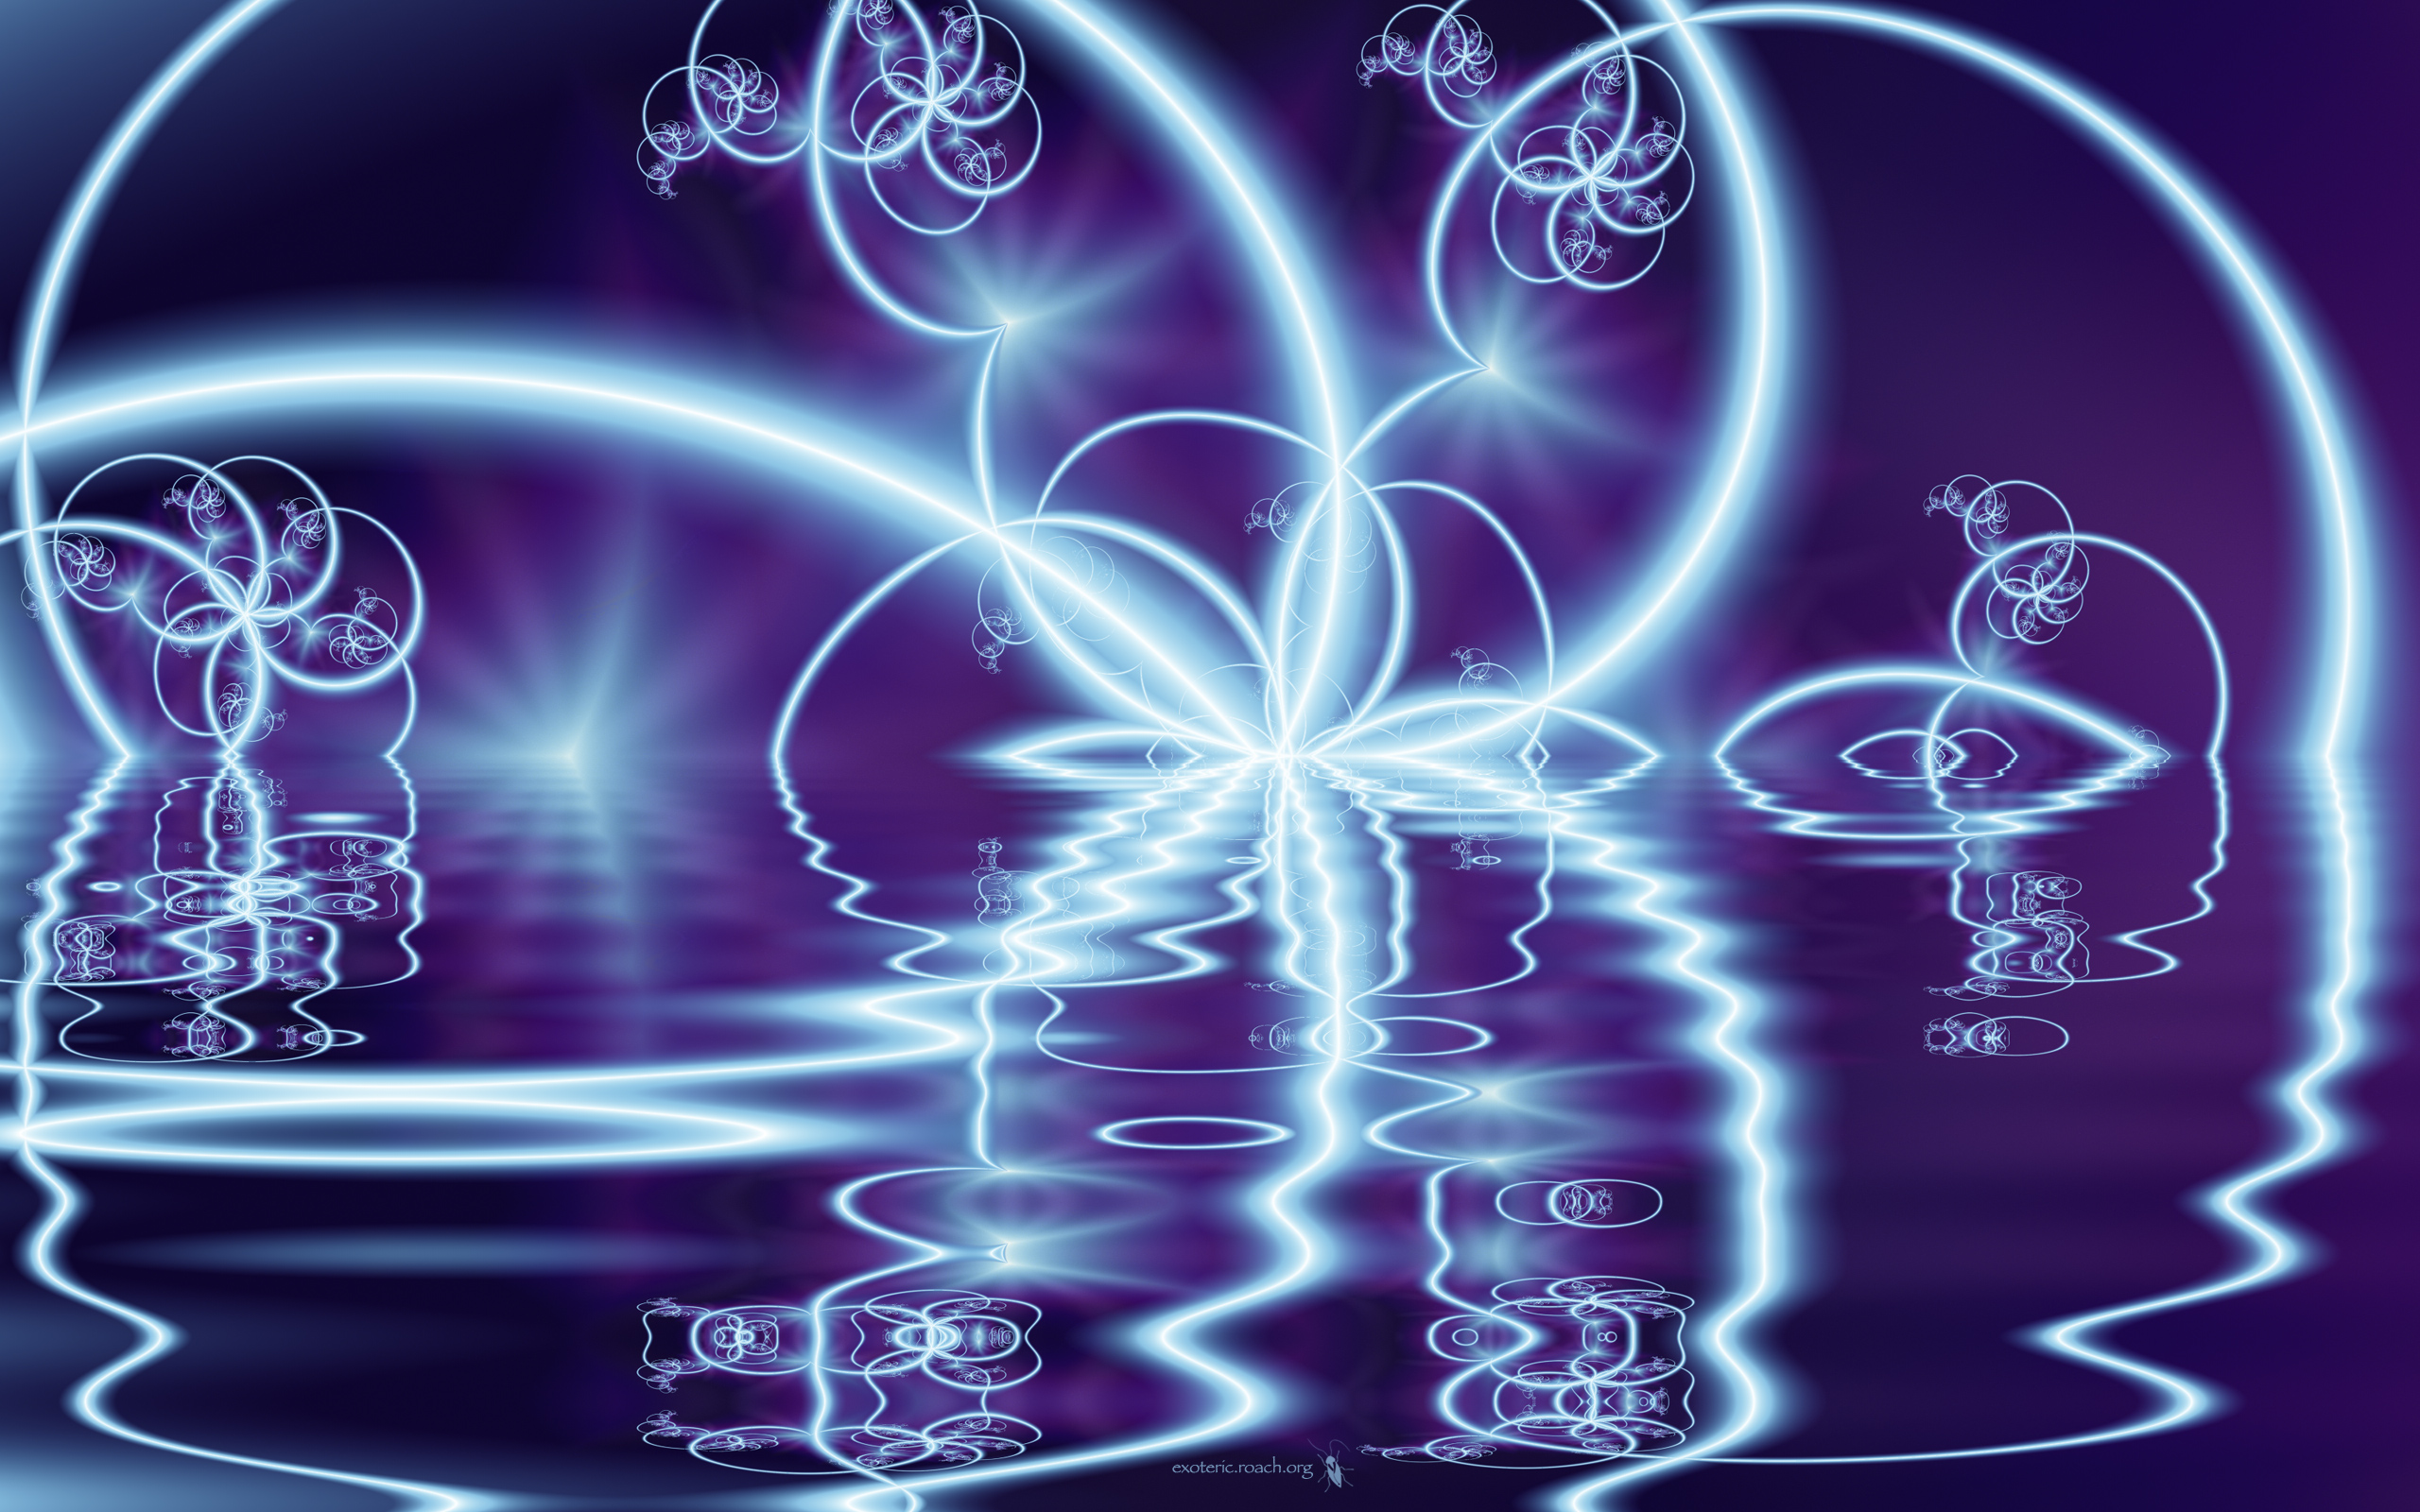 Abstract fractal floral design with water elements